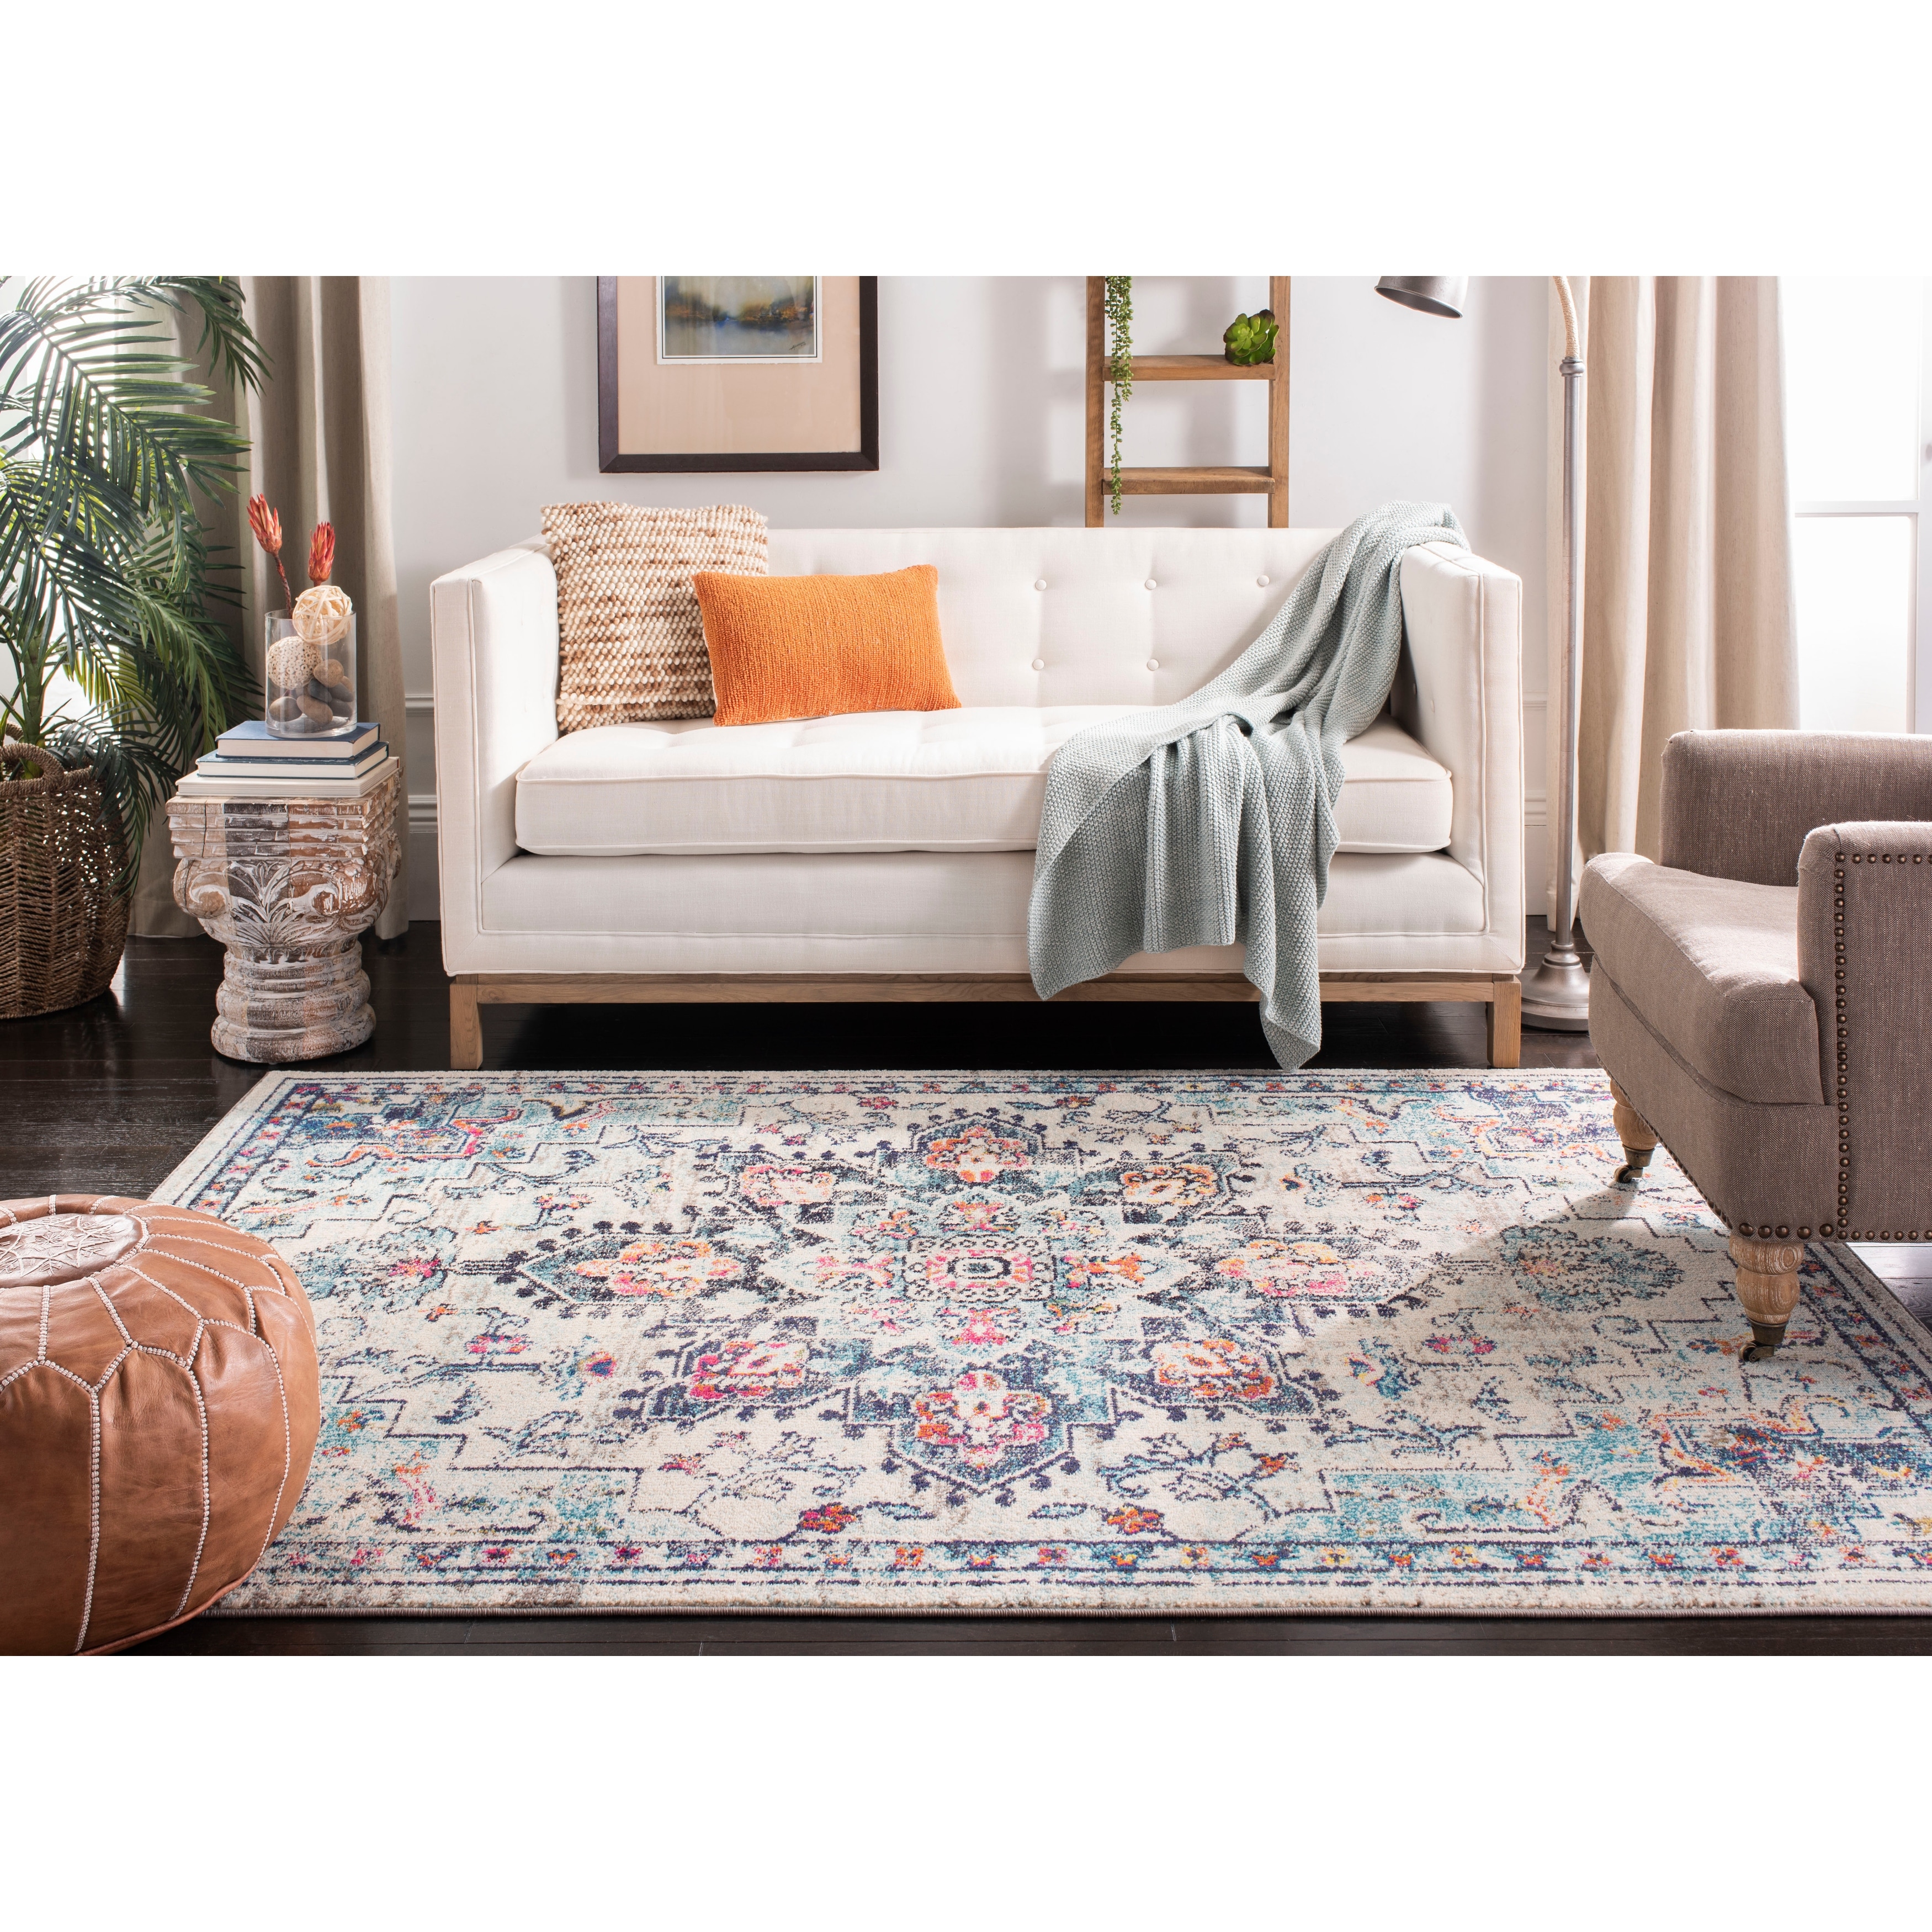 https://ak1.ostkcdn.com/images/products/is/images/direct/d899dd0af61851f39ffe02ccd1c8c7645be5e6a1/SAFAVIEH-Madison-Diederike-Boho-Medallion-Distressed-Rug.jpg